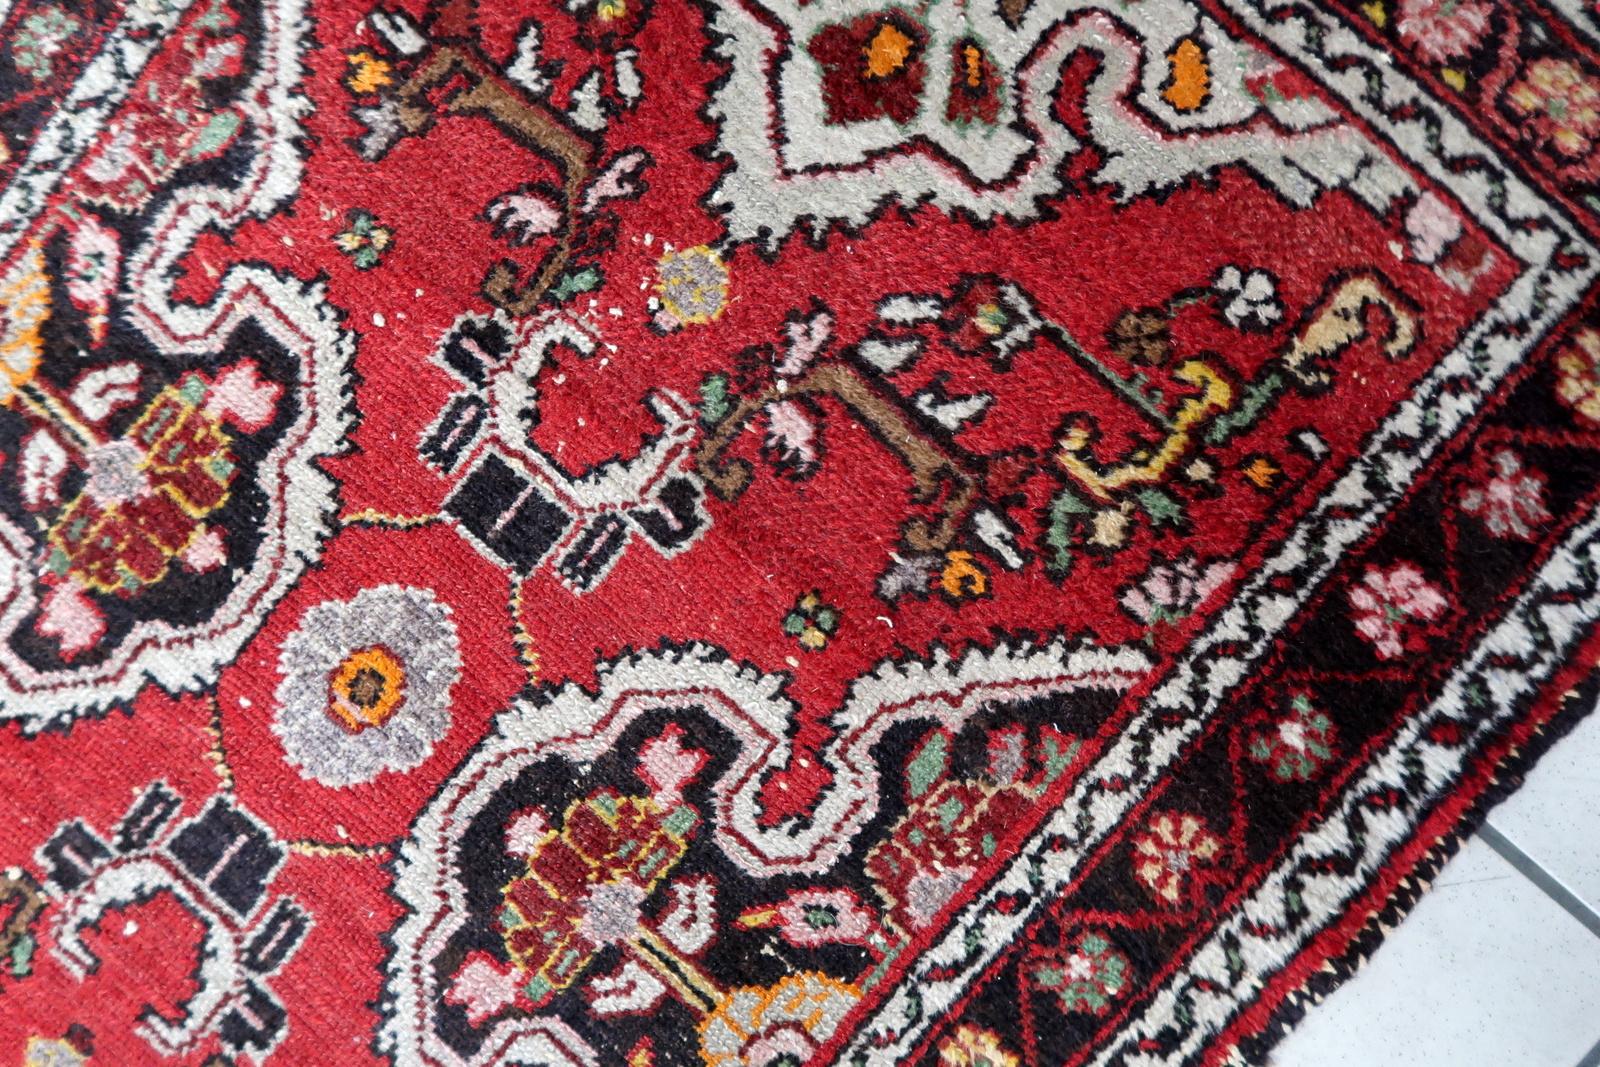 Handmade Antique Persian Malayer Runner Rug 2.5' x 12.5', 1920s - 1C1143 In Good Condition For Sale In Bordeaux, FR